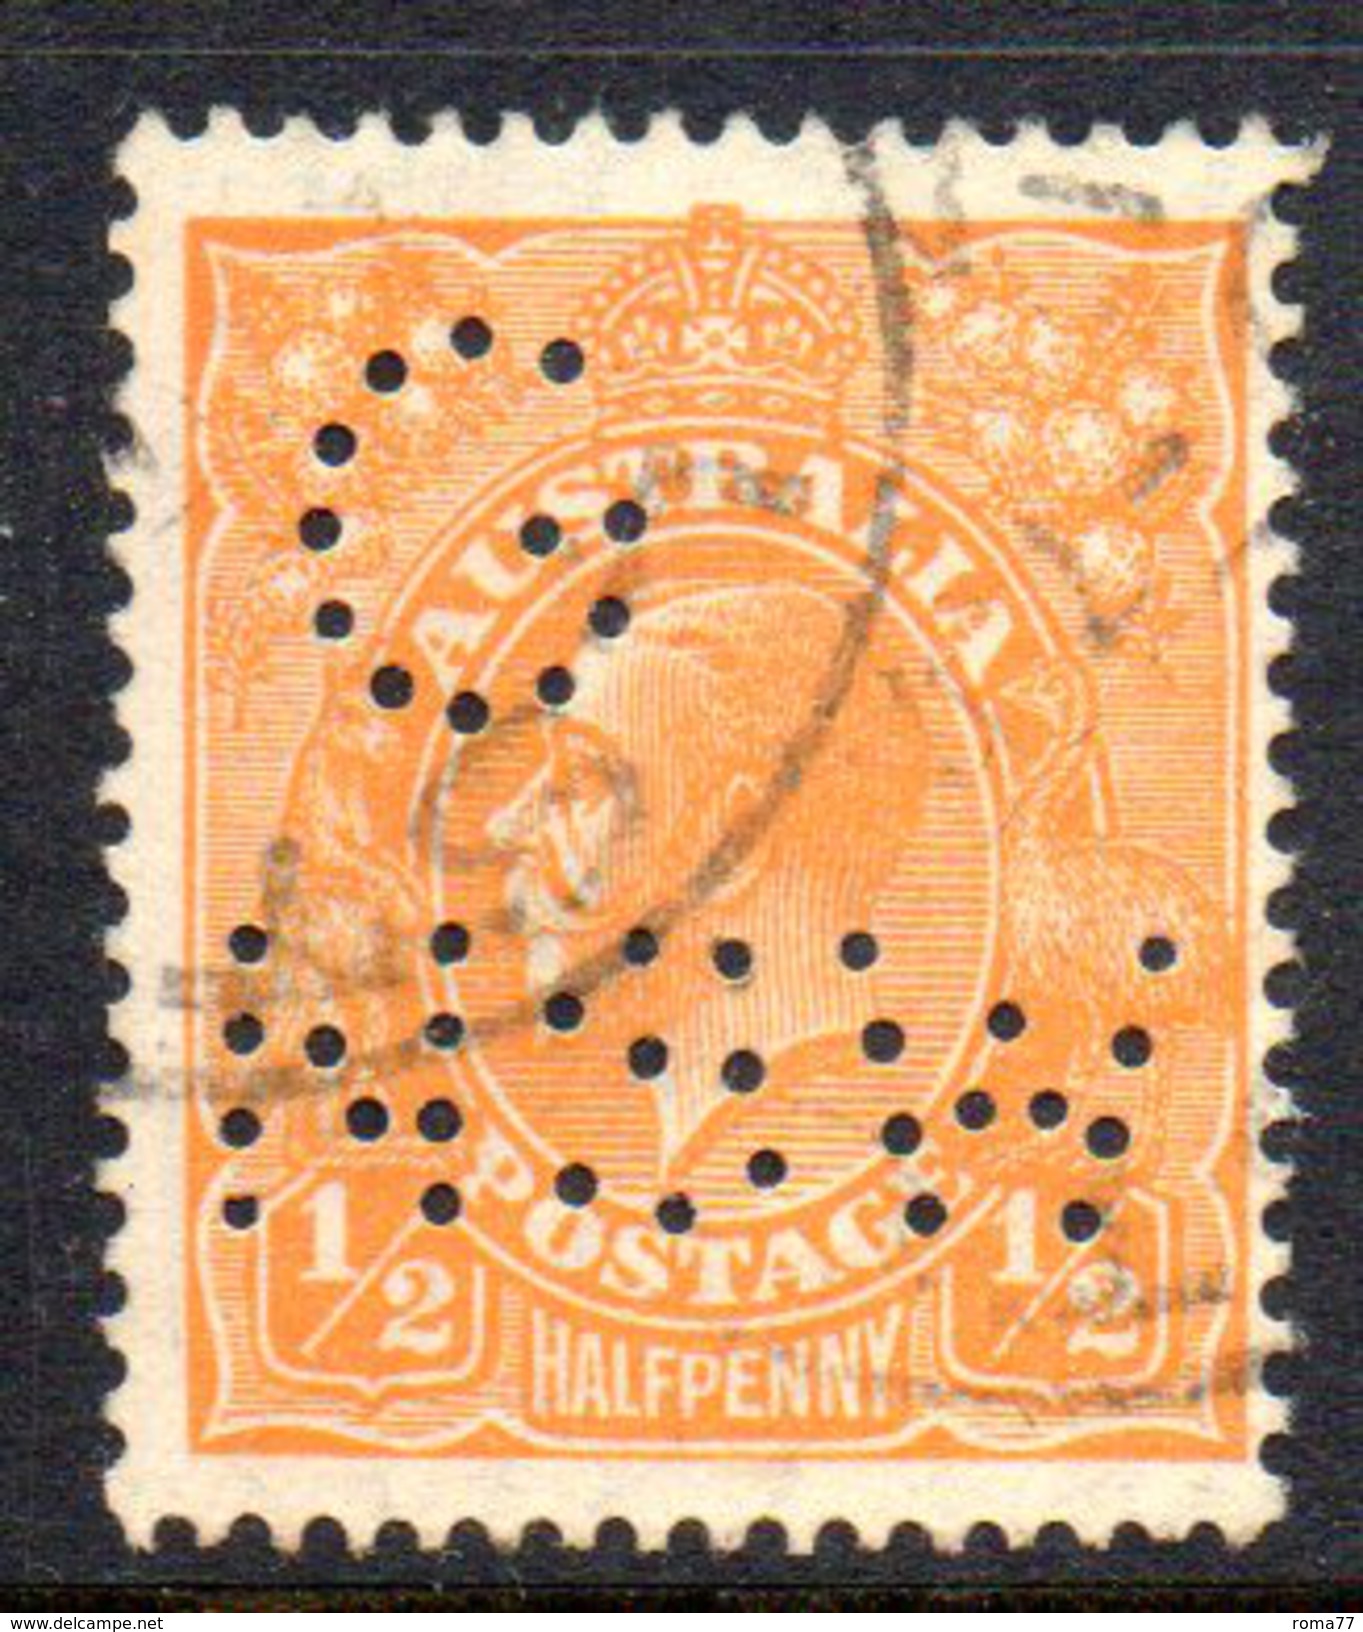 T1836 - AUSTRALIA 1/2 Pence Used WMK C Of A . Punctured G NSW - Gebraucht